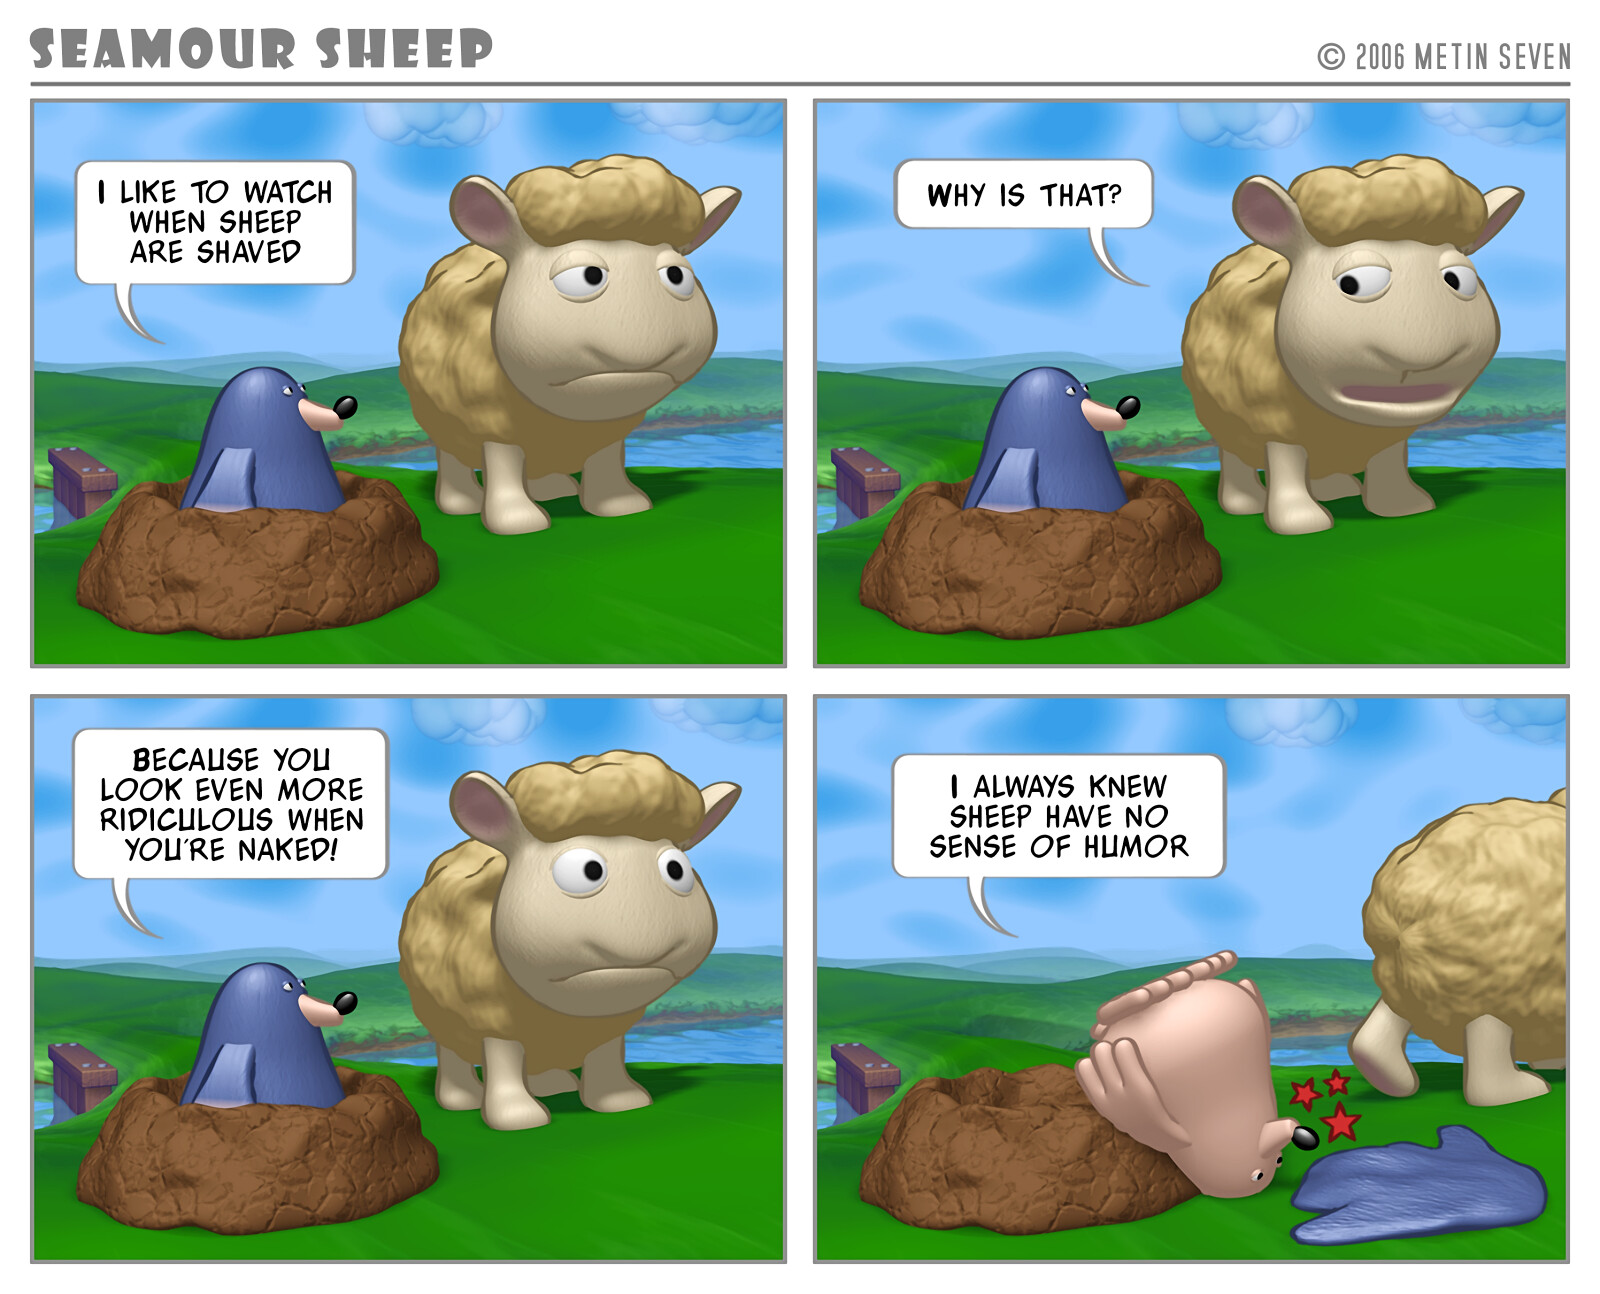 Seamour Sheep and Marty Mole comic strip, first episode: Shaved